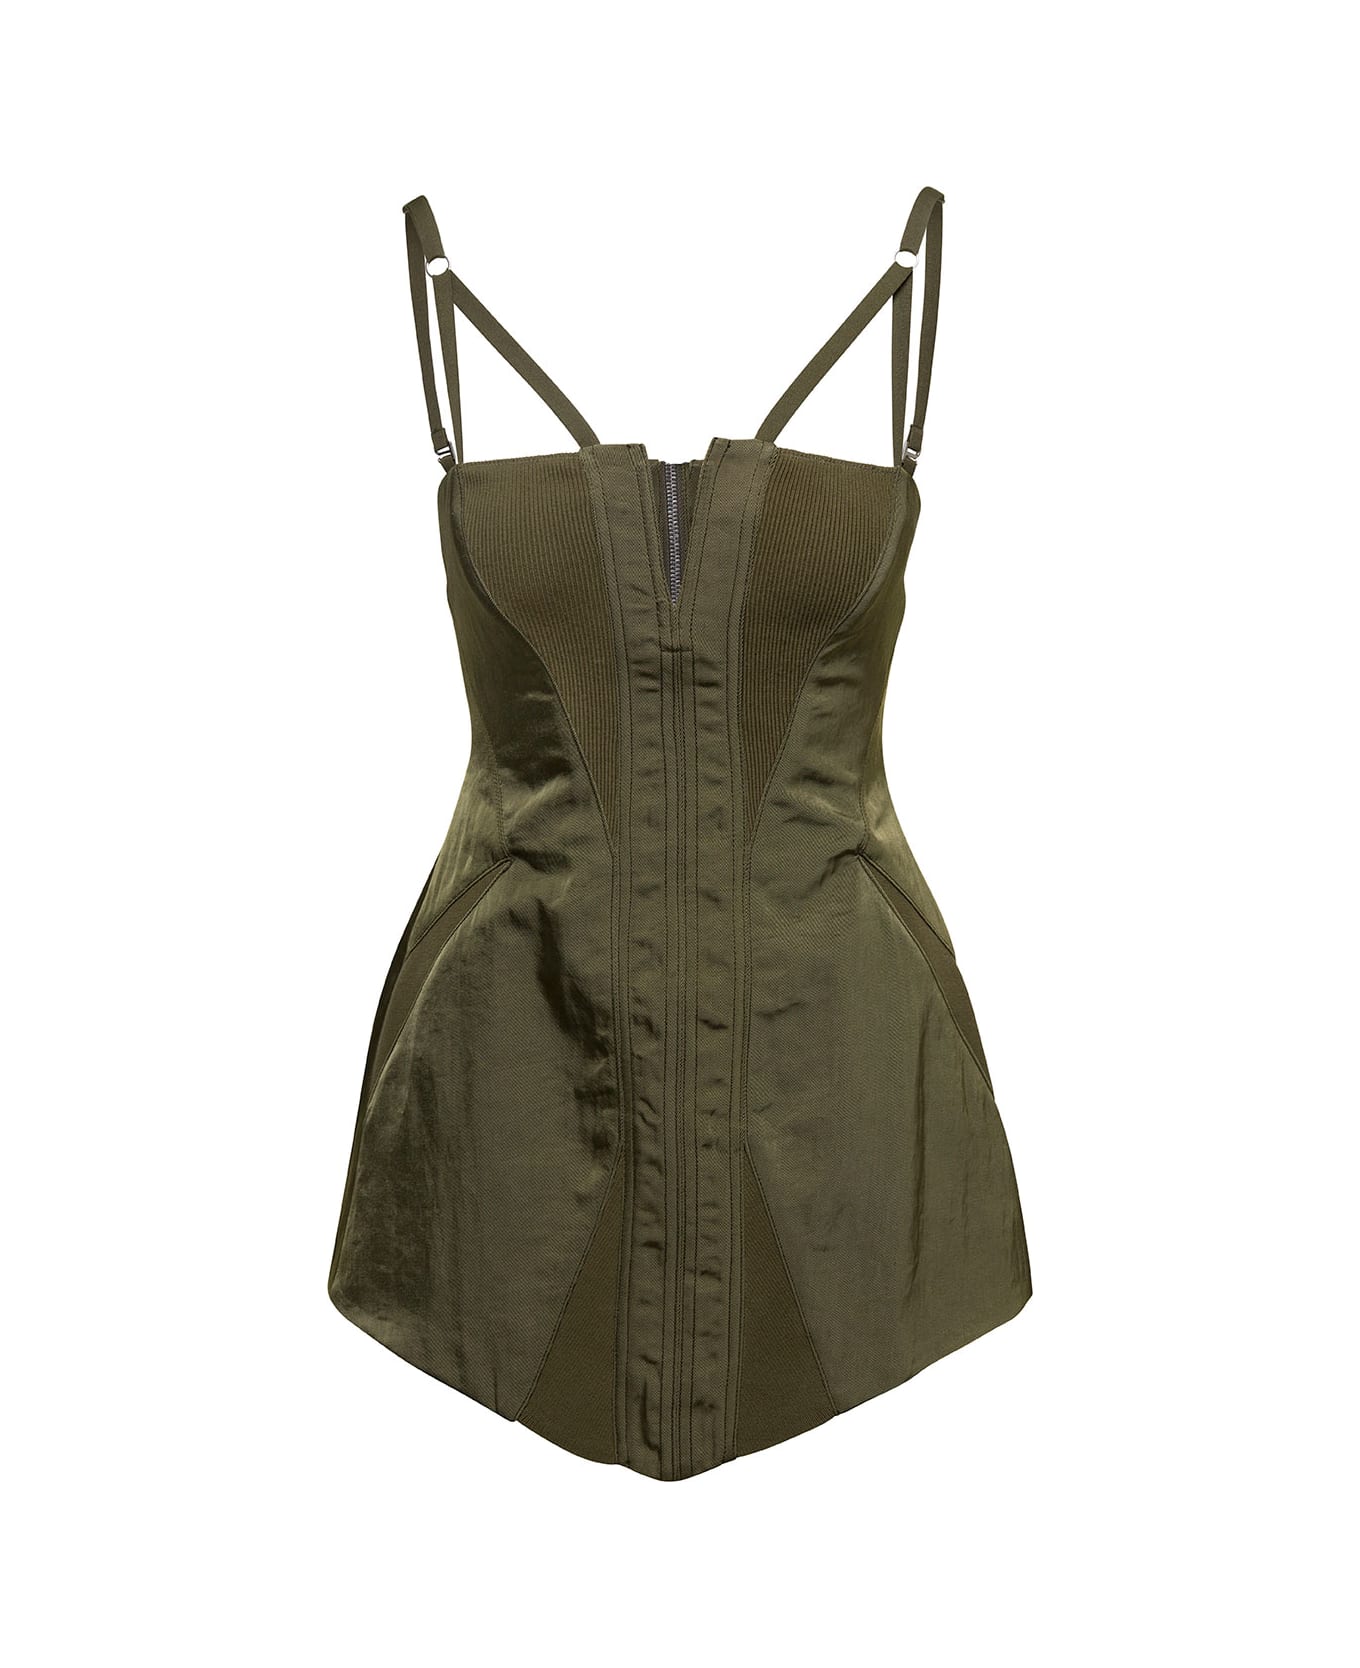 Dion Lee Green Sleeveless Minidress With Contouring Panel Construction In Nylon Woman - Green